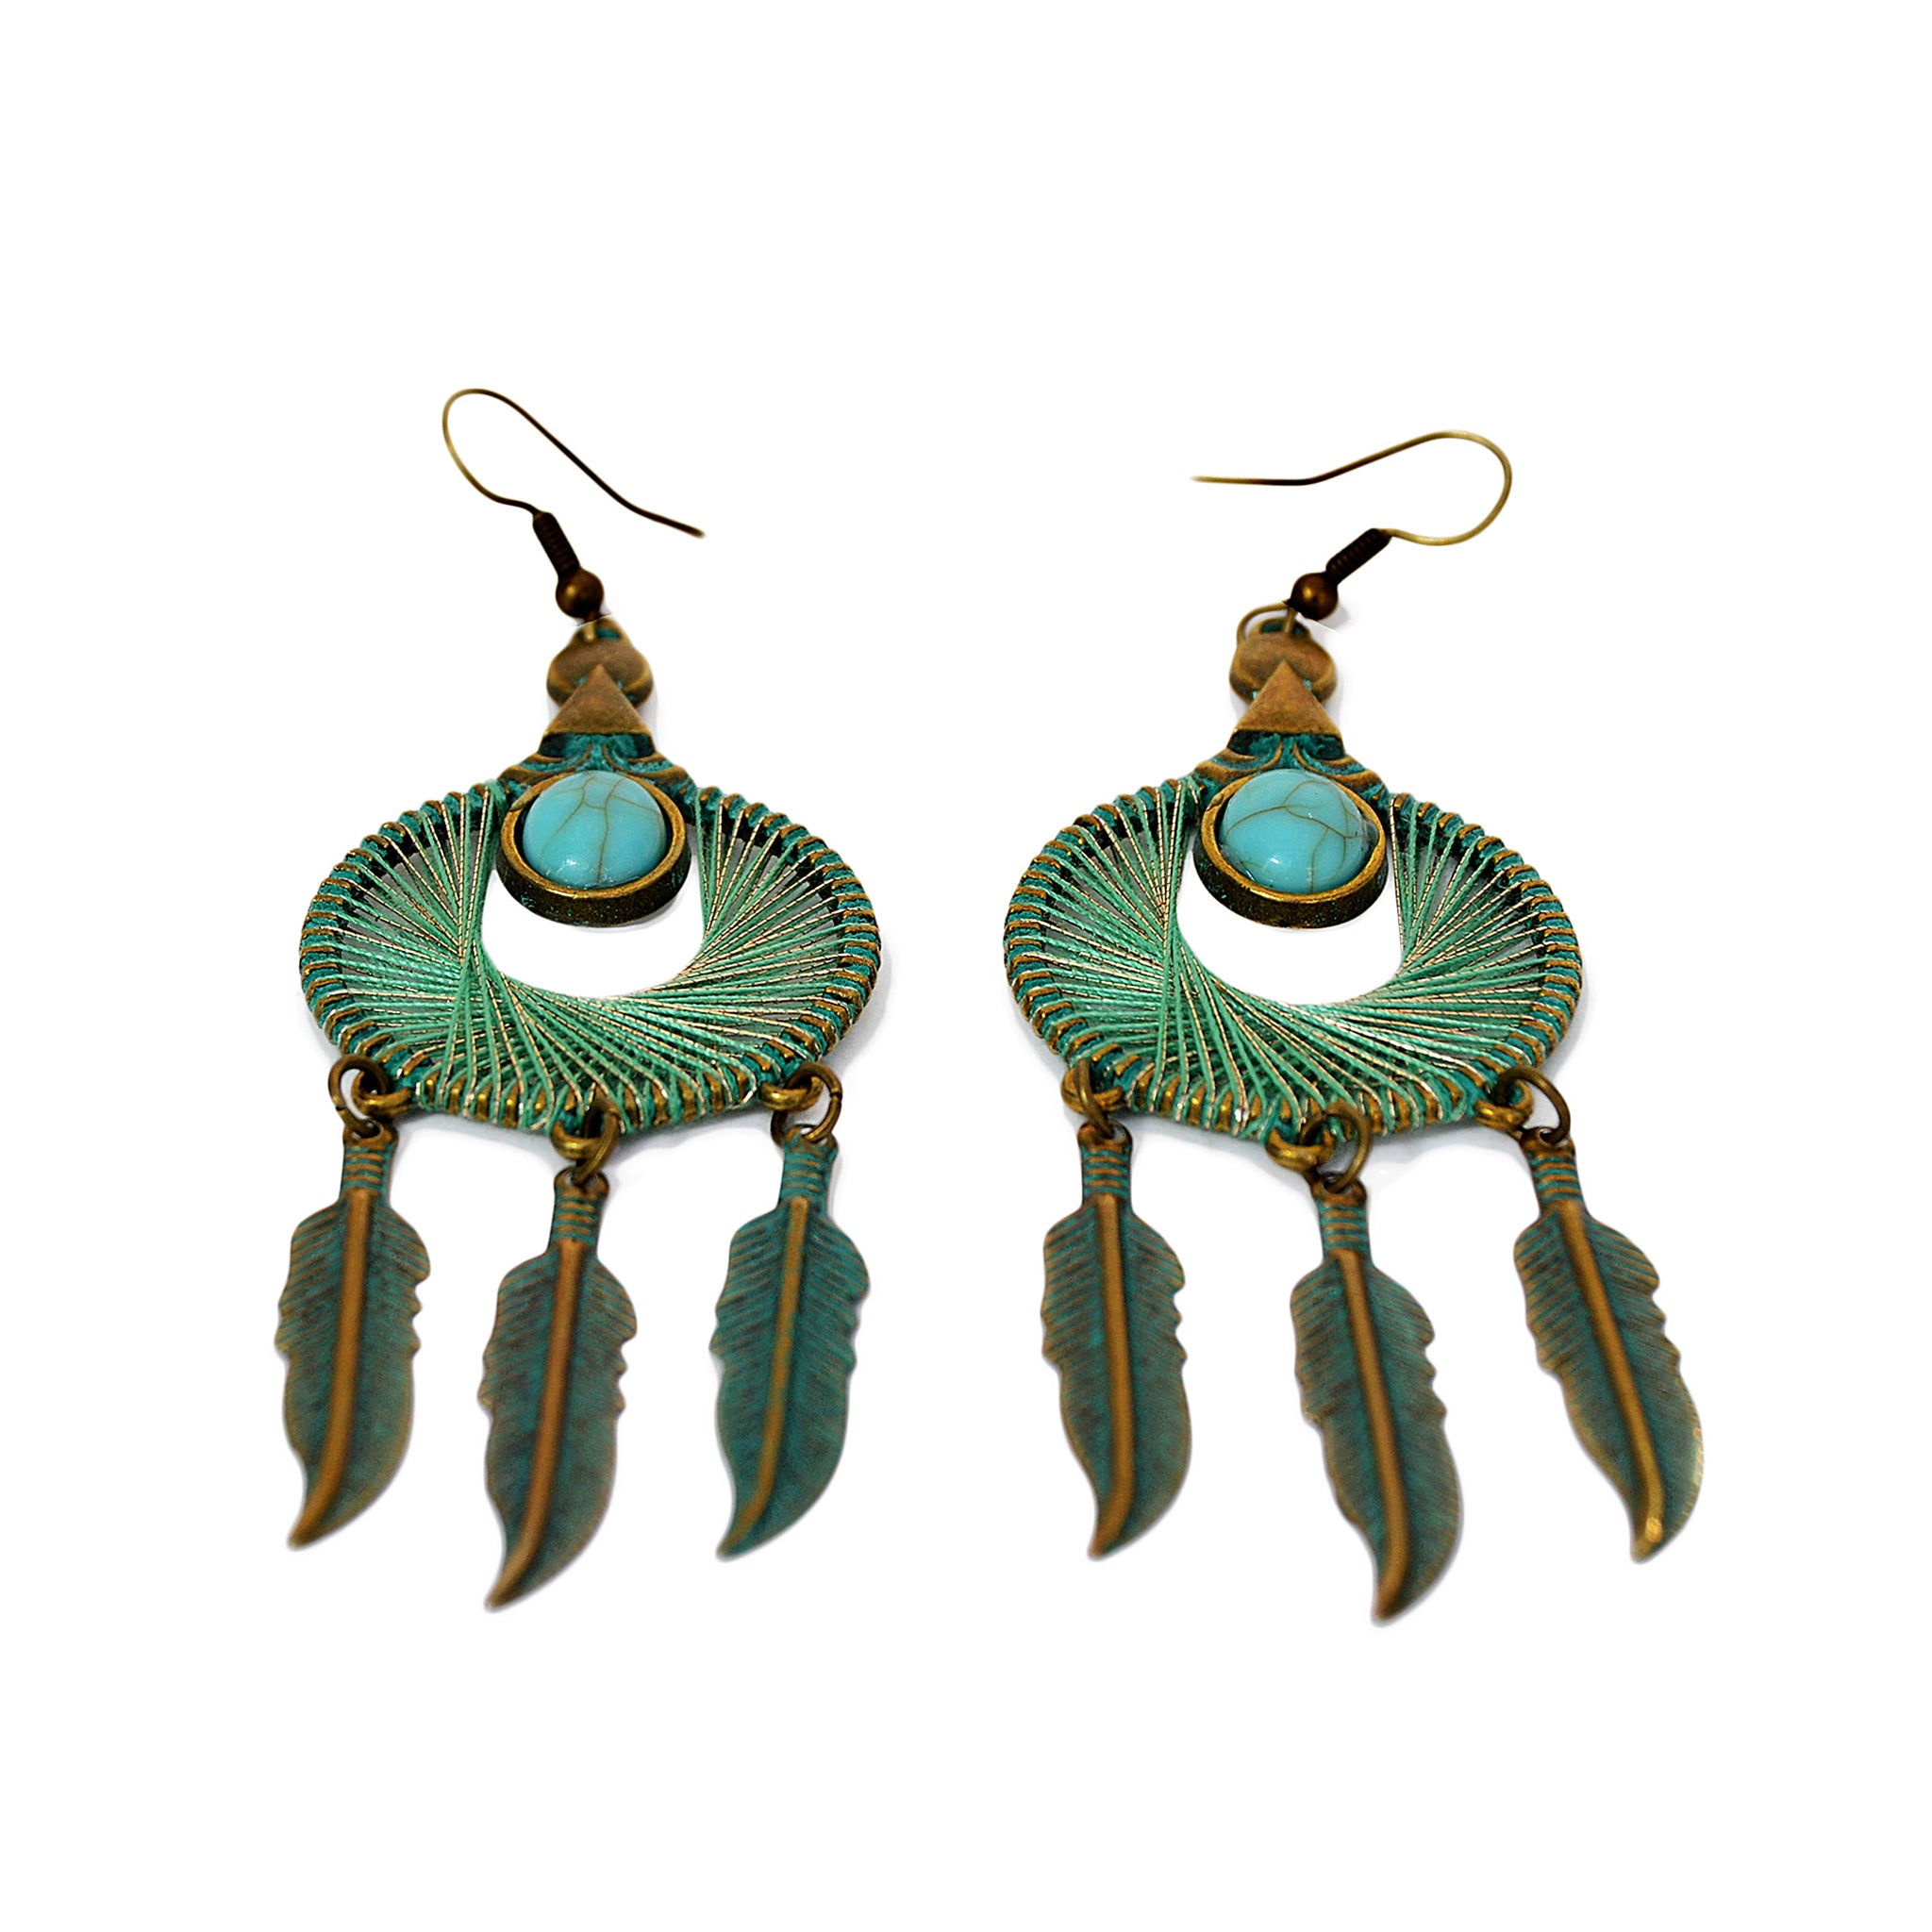 Hoop aged patina earrings with blue and gold wrapped strings, turquoise bead and hanging feathers